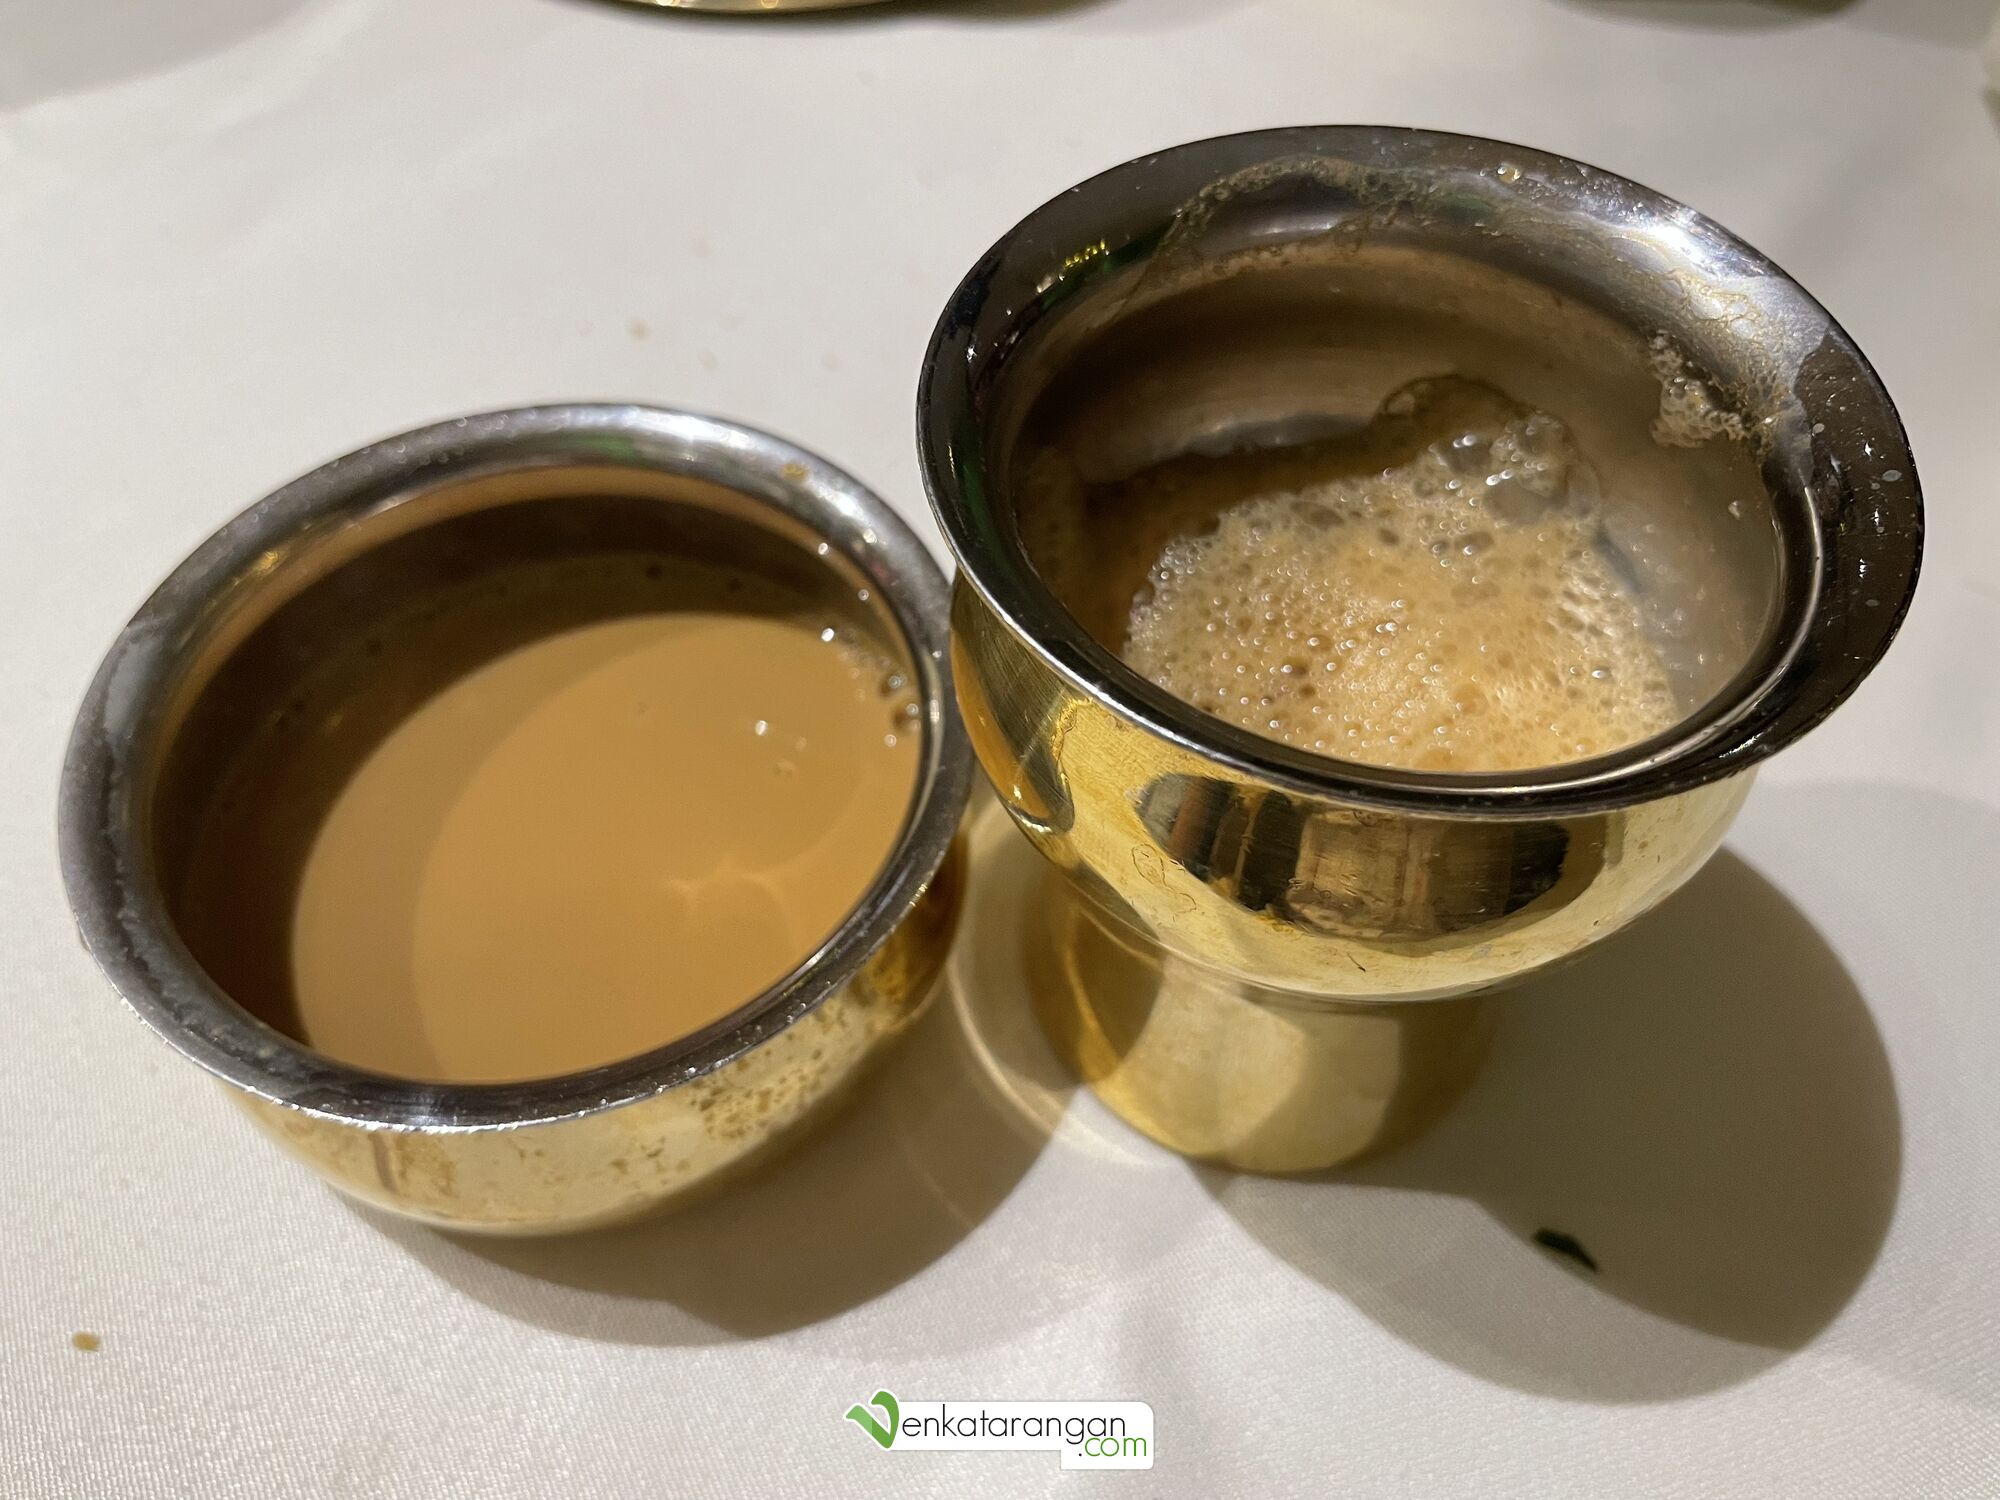 Piping hot, Madras filter coffee served in a brass tumbler